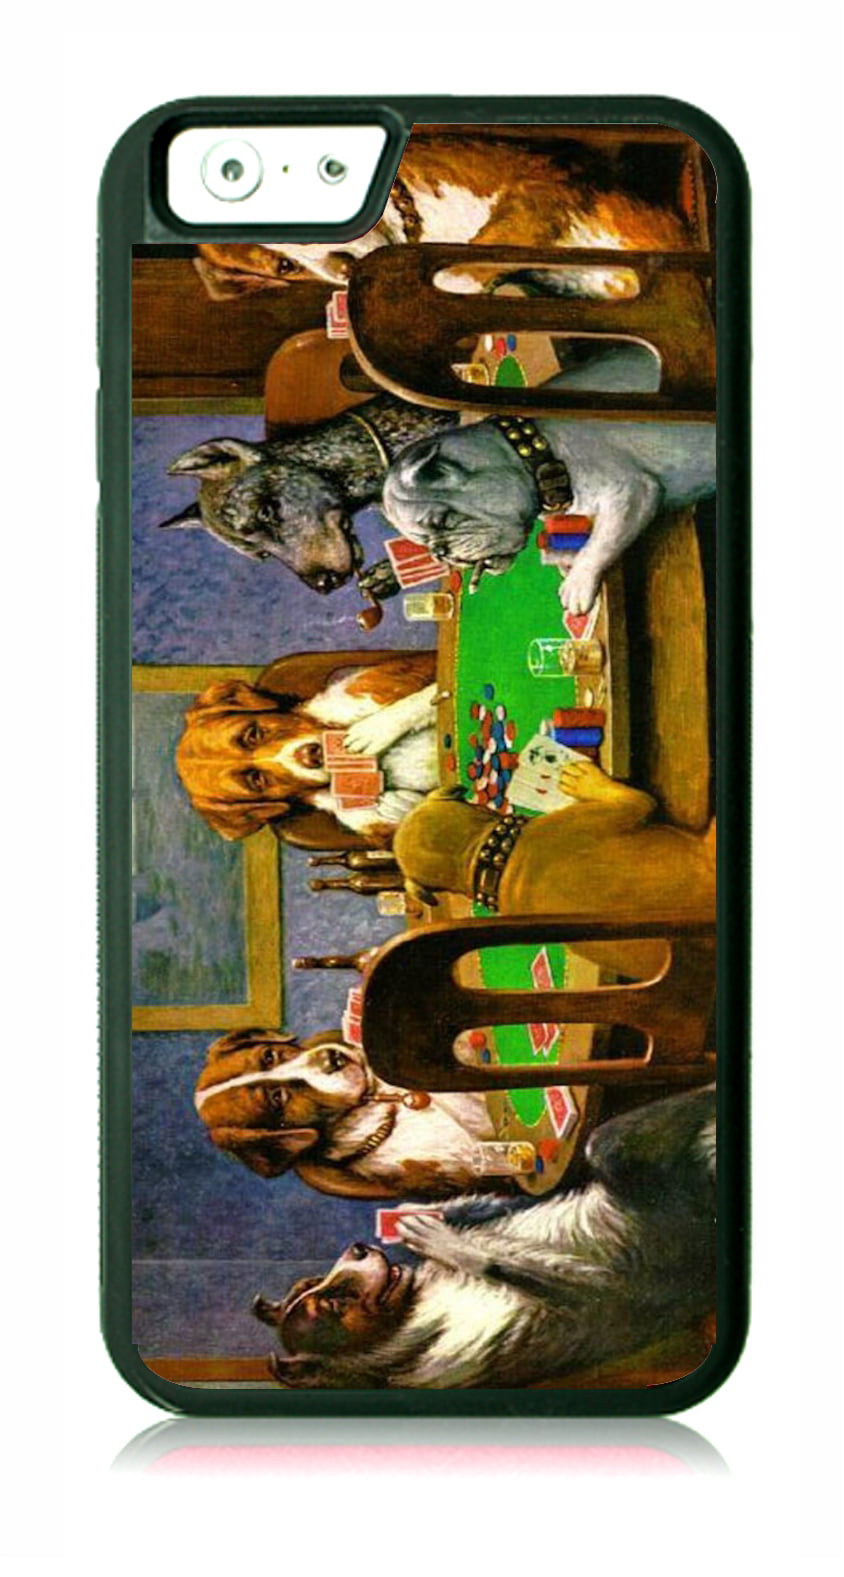 Cm Coolidge S Dogs Playing Poker Painting Black Rubber Case For The Apple Iphone 6 Iphone 6s Iphone 6 Accessories Iphone 6s Accessories Walmart Com Walmart Com